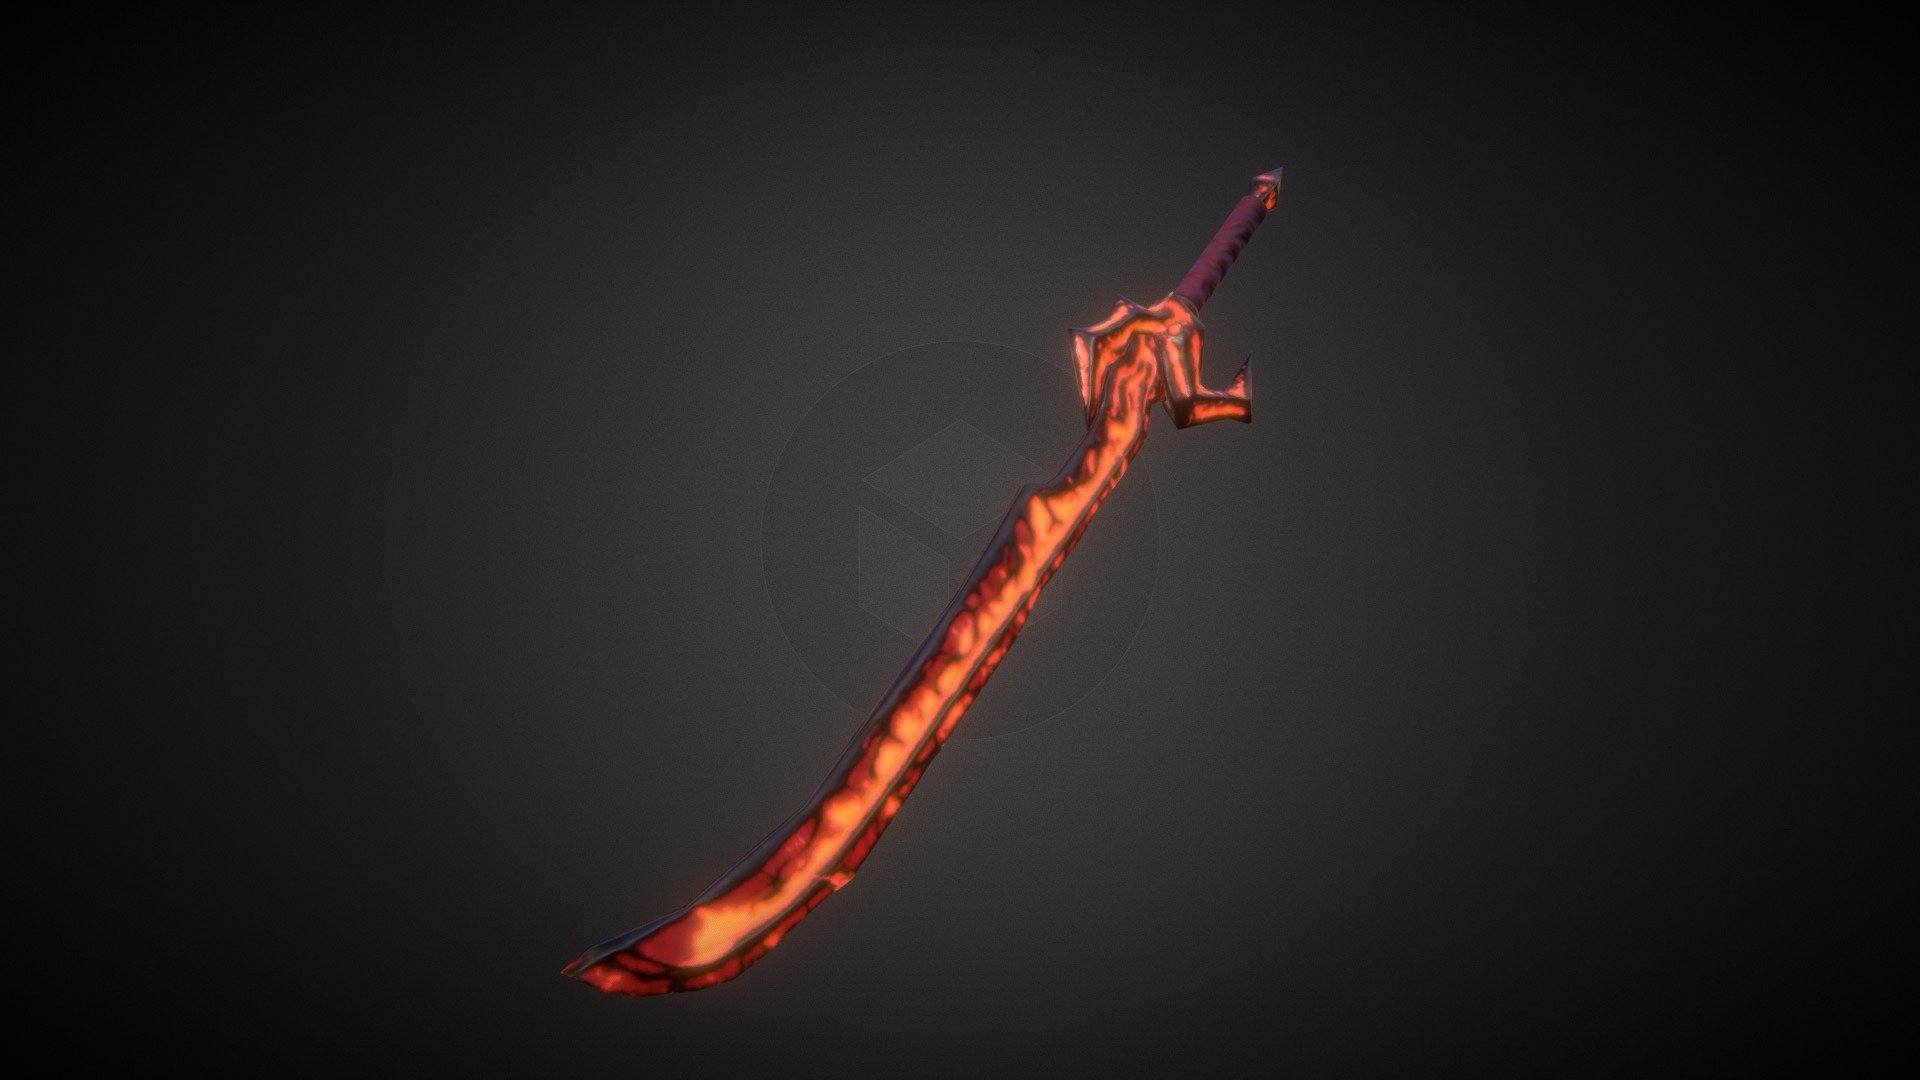 It's a flaming sword I made mostly for fun and some stylized art practice

The piece is fairly lowpoly with a &ldquo;Molten Lava